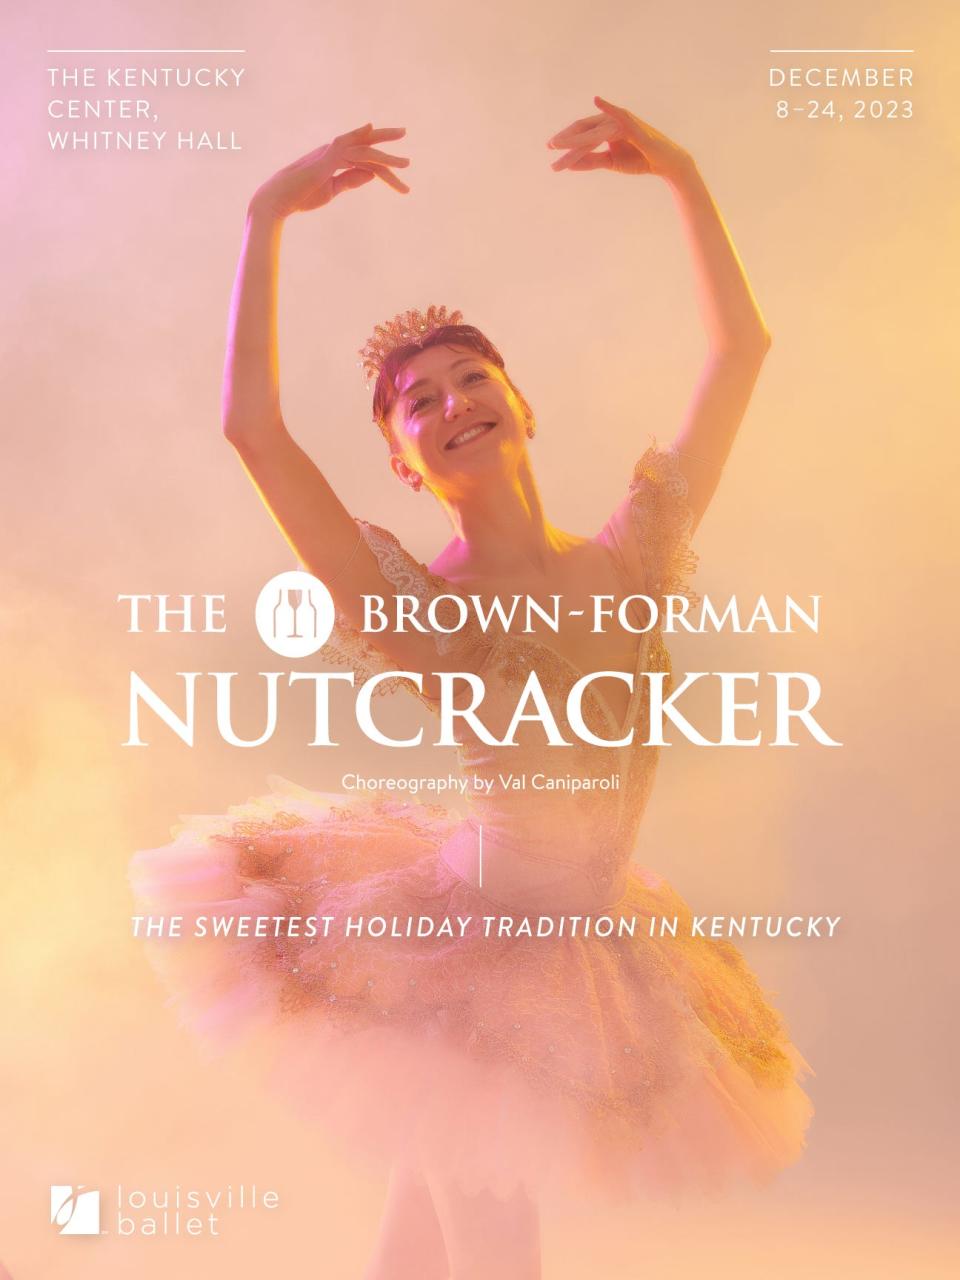 The sweetest holiday tradition in Kentucky. Experience the nostalgic holiday tale of Marie and her Nutcracker prince as they journey to the magical world of the Sugar Plum Fairy. The Brown-Forman Nutcracker is a delight for all ages with a distinctly Kentucky flavor.